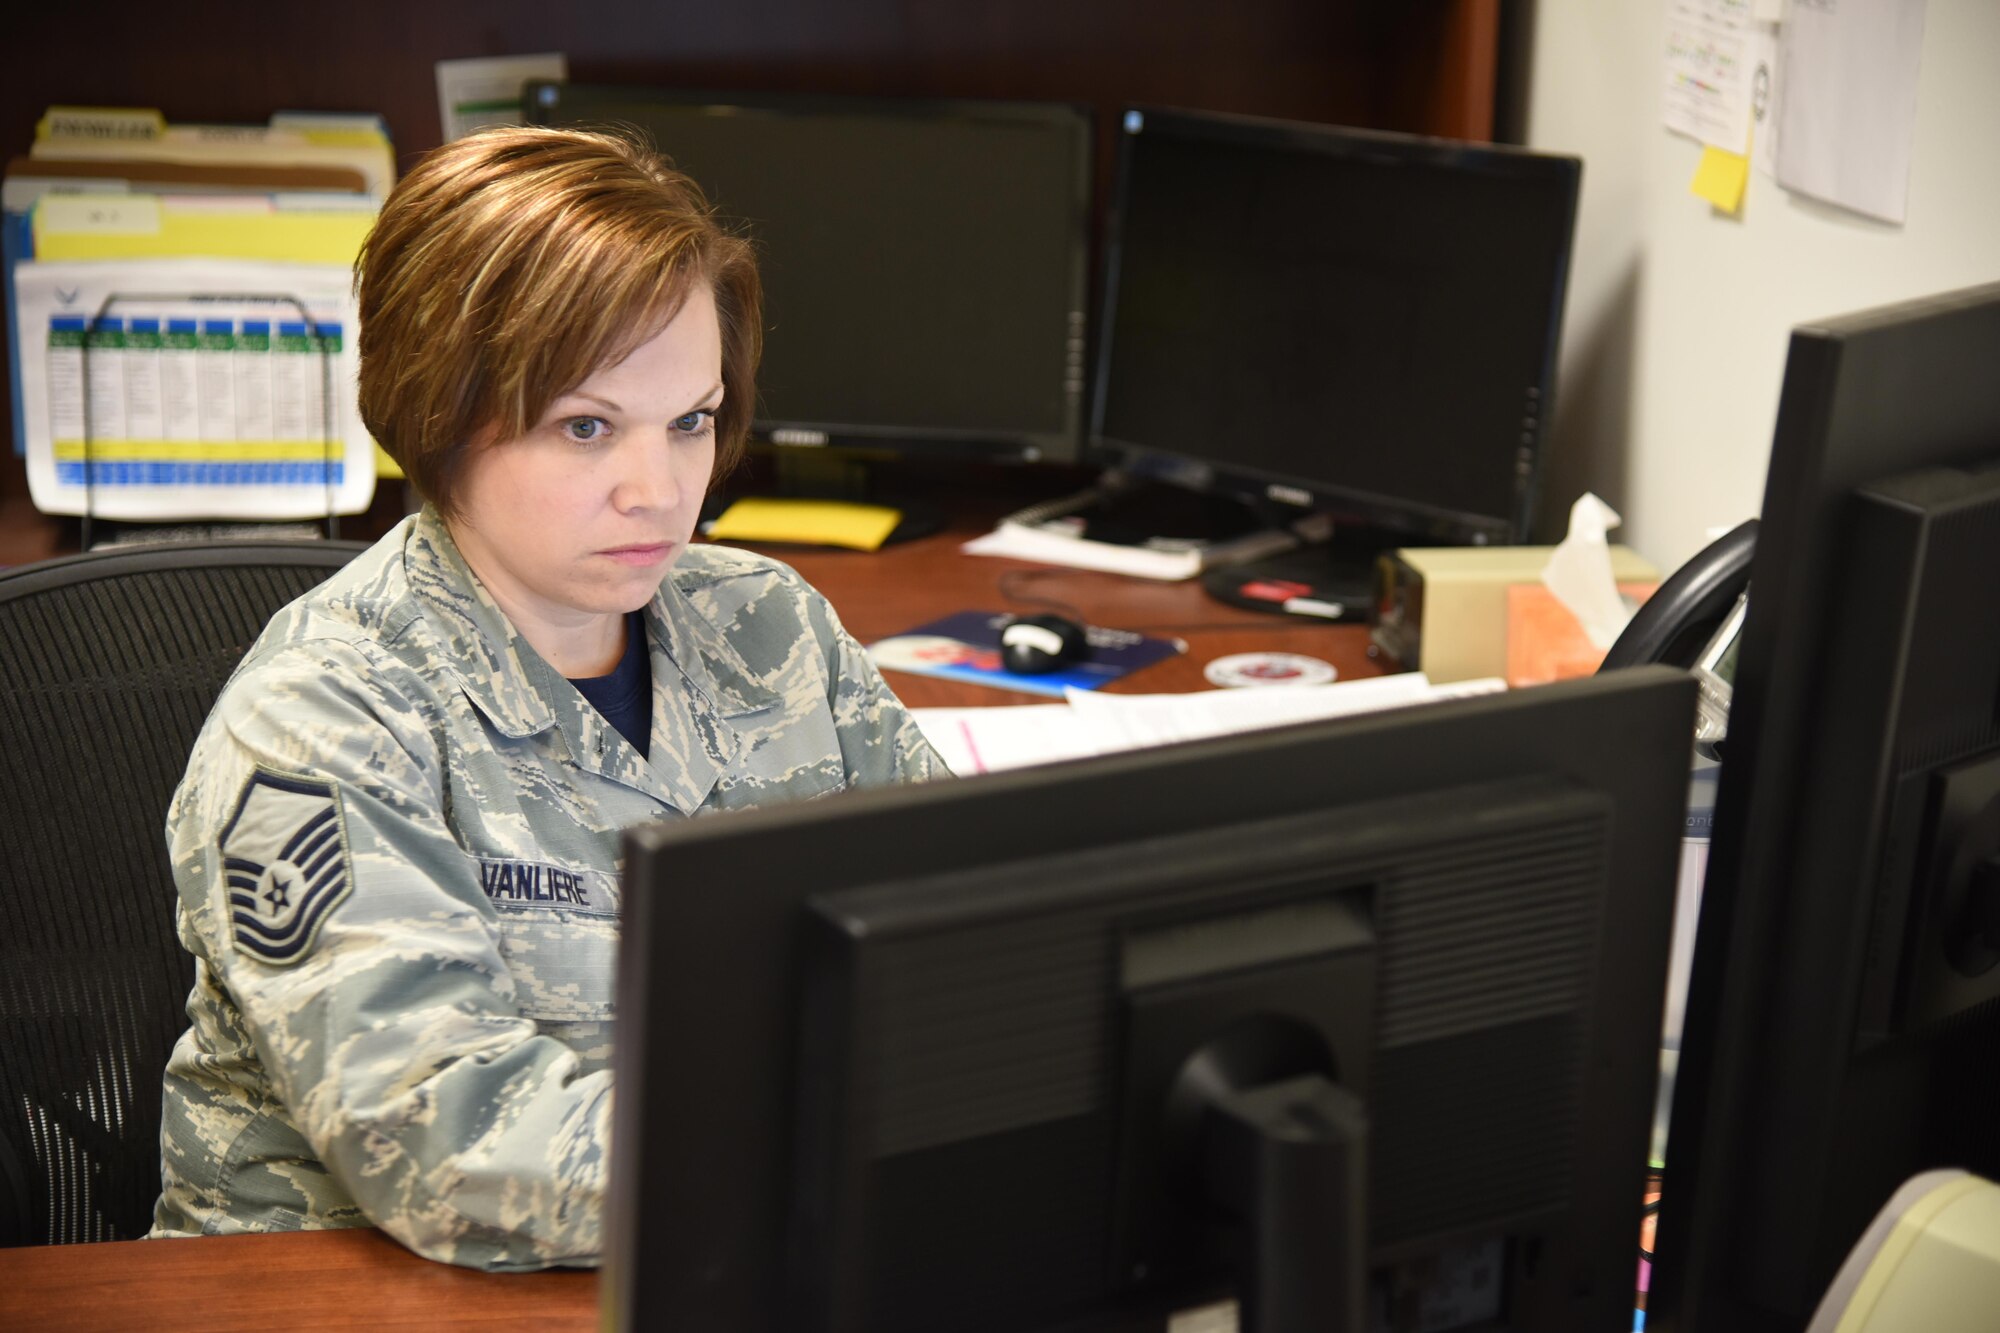 Master Sgt. Bridget VanLiere, 114th Force Support Squadron installation personnel readiness, is the key Airman in the 114th Force Support Squadron that ensures Airmen are prepared for the Reserve Component Period (RCP) deployment and future deployments for the 114th Fighter Wing. Her role is to to ensure all required training and CBTs (computer-based training) are accomplished, member has all required equipment and uniforms, all medical requirements are met and orders are complete in a timely manner. (Air National Guard photo by Staff Sgt. Duane Duimstra/Released)